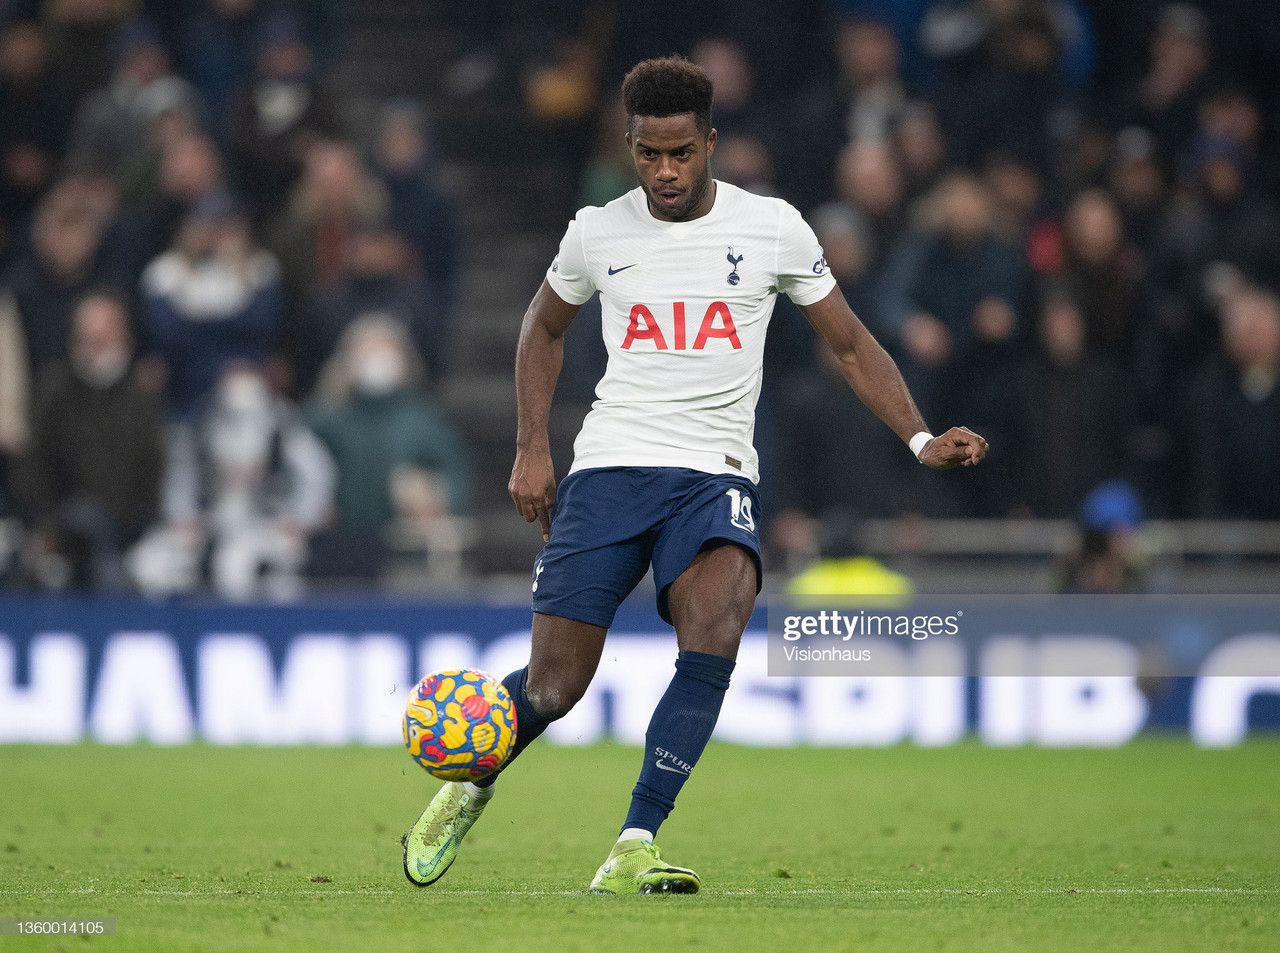 Ryan Sessegnon out with injury